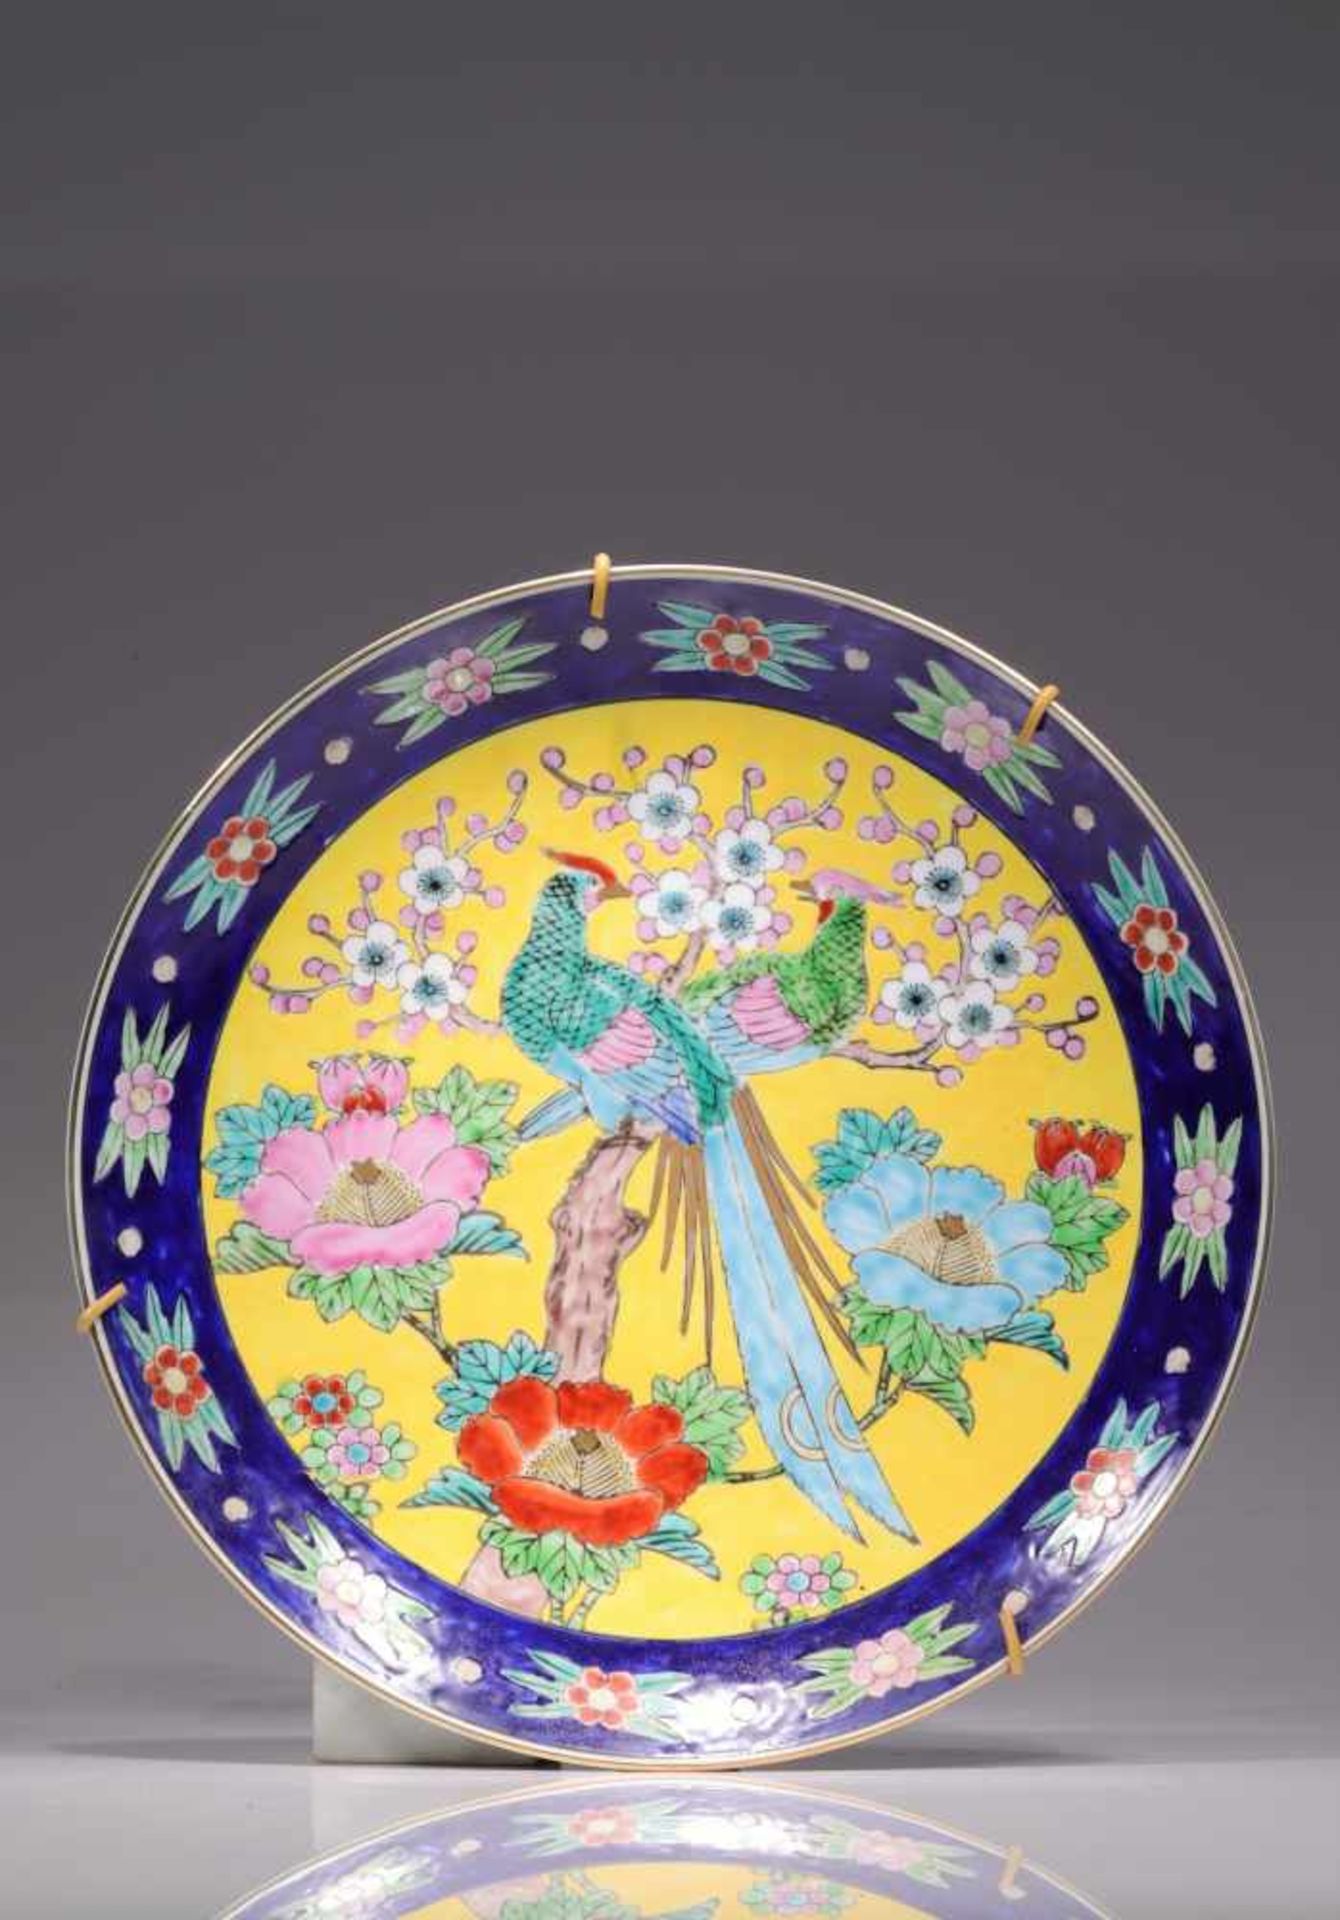 ROUND YELLOWISH PLATEporcelain,China, 19th century,Size: 31 cmPair of blue and green parrots on